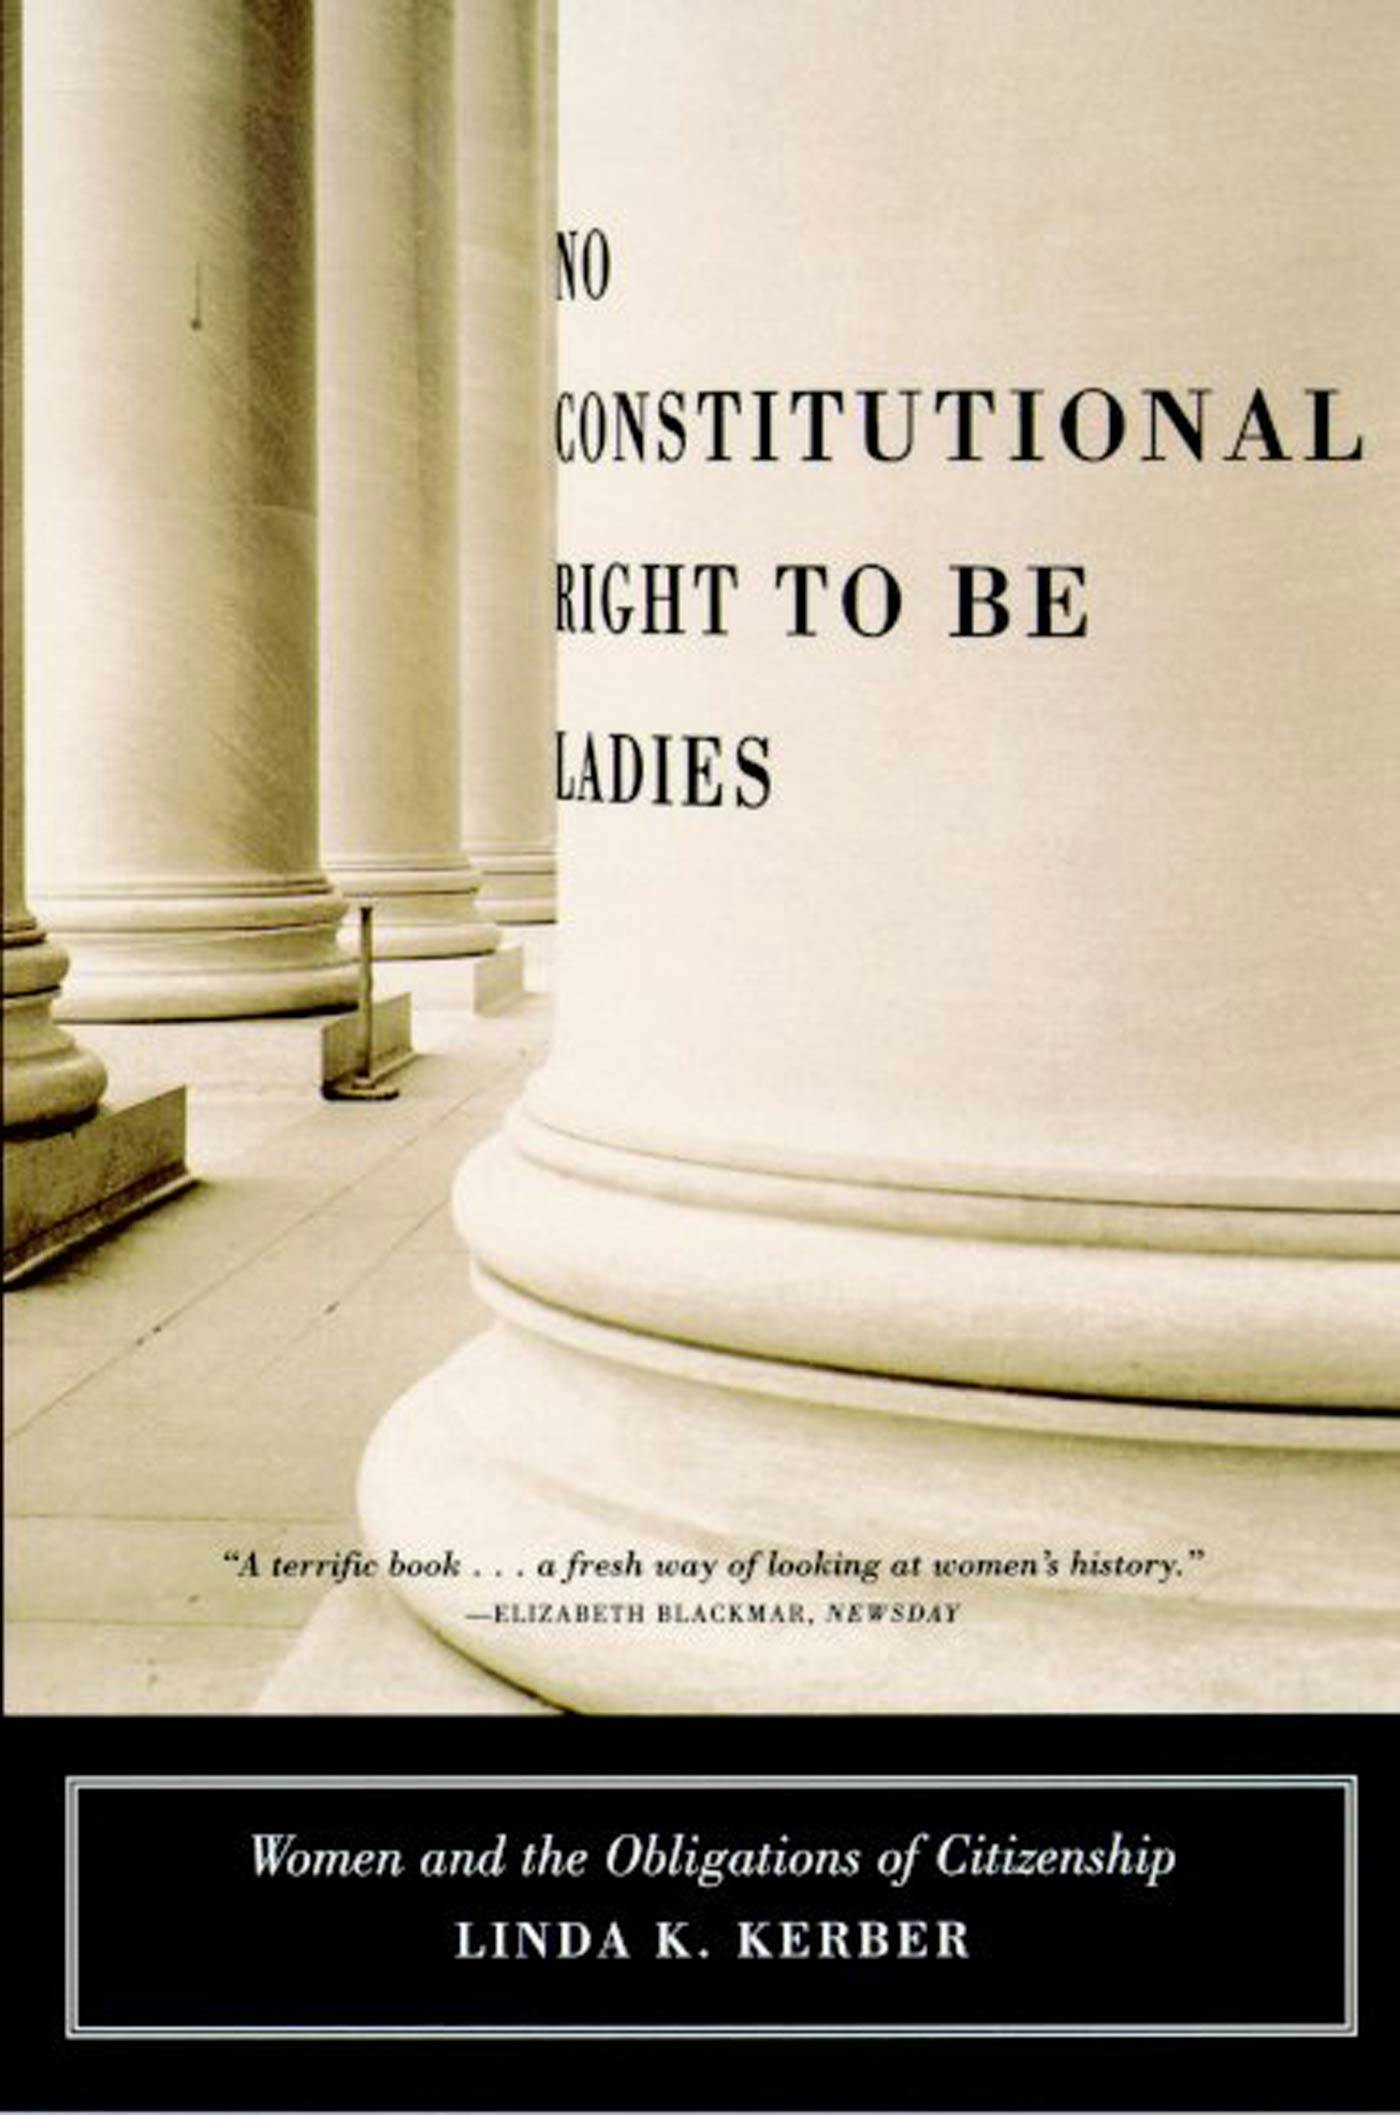 No Constitutional Right to Be Ladies pic